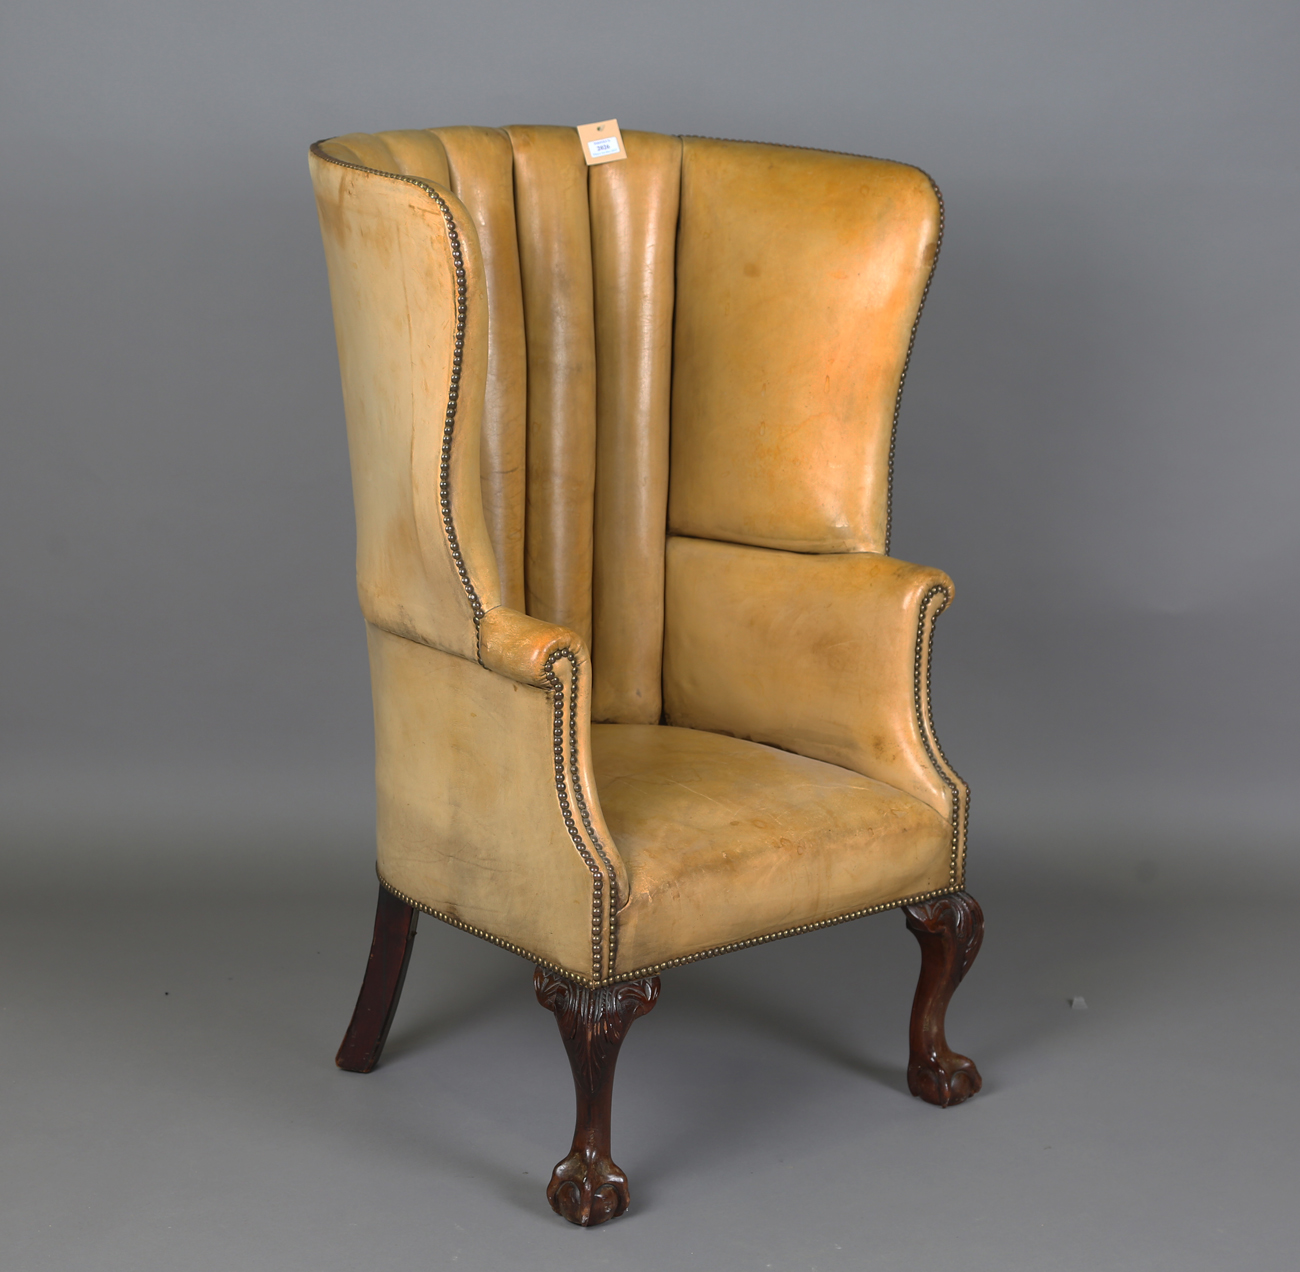 A 20th century George III style armchair, upholstered in studded tan leather, raised on carved